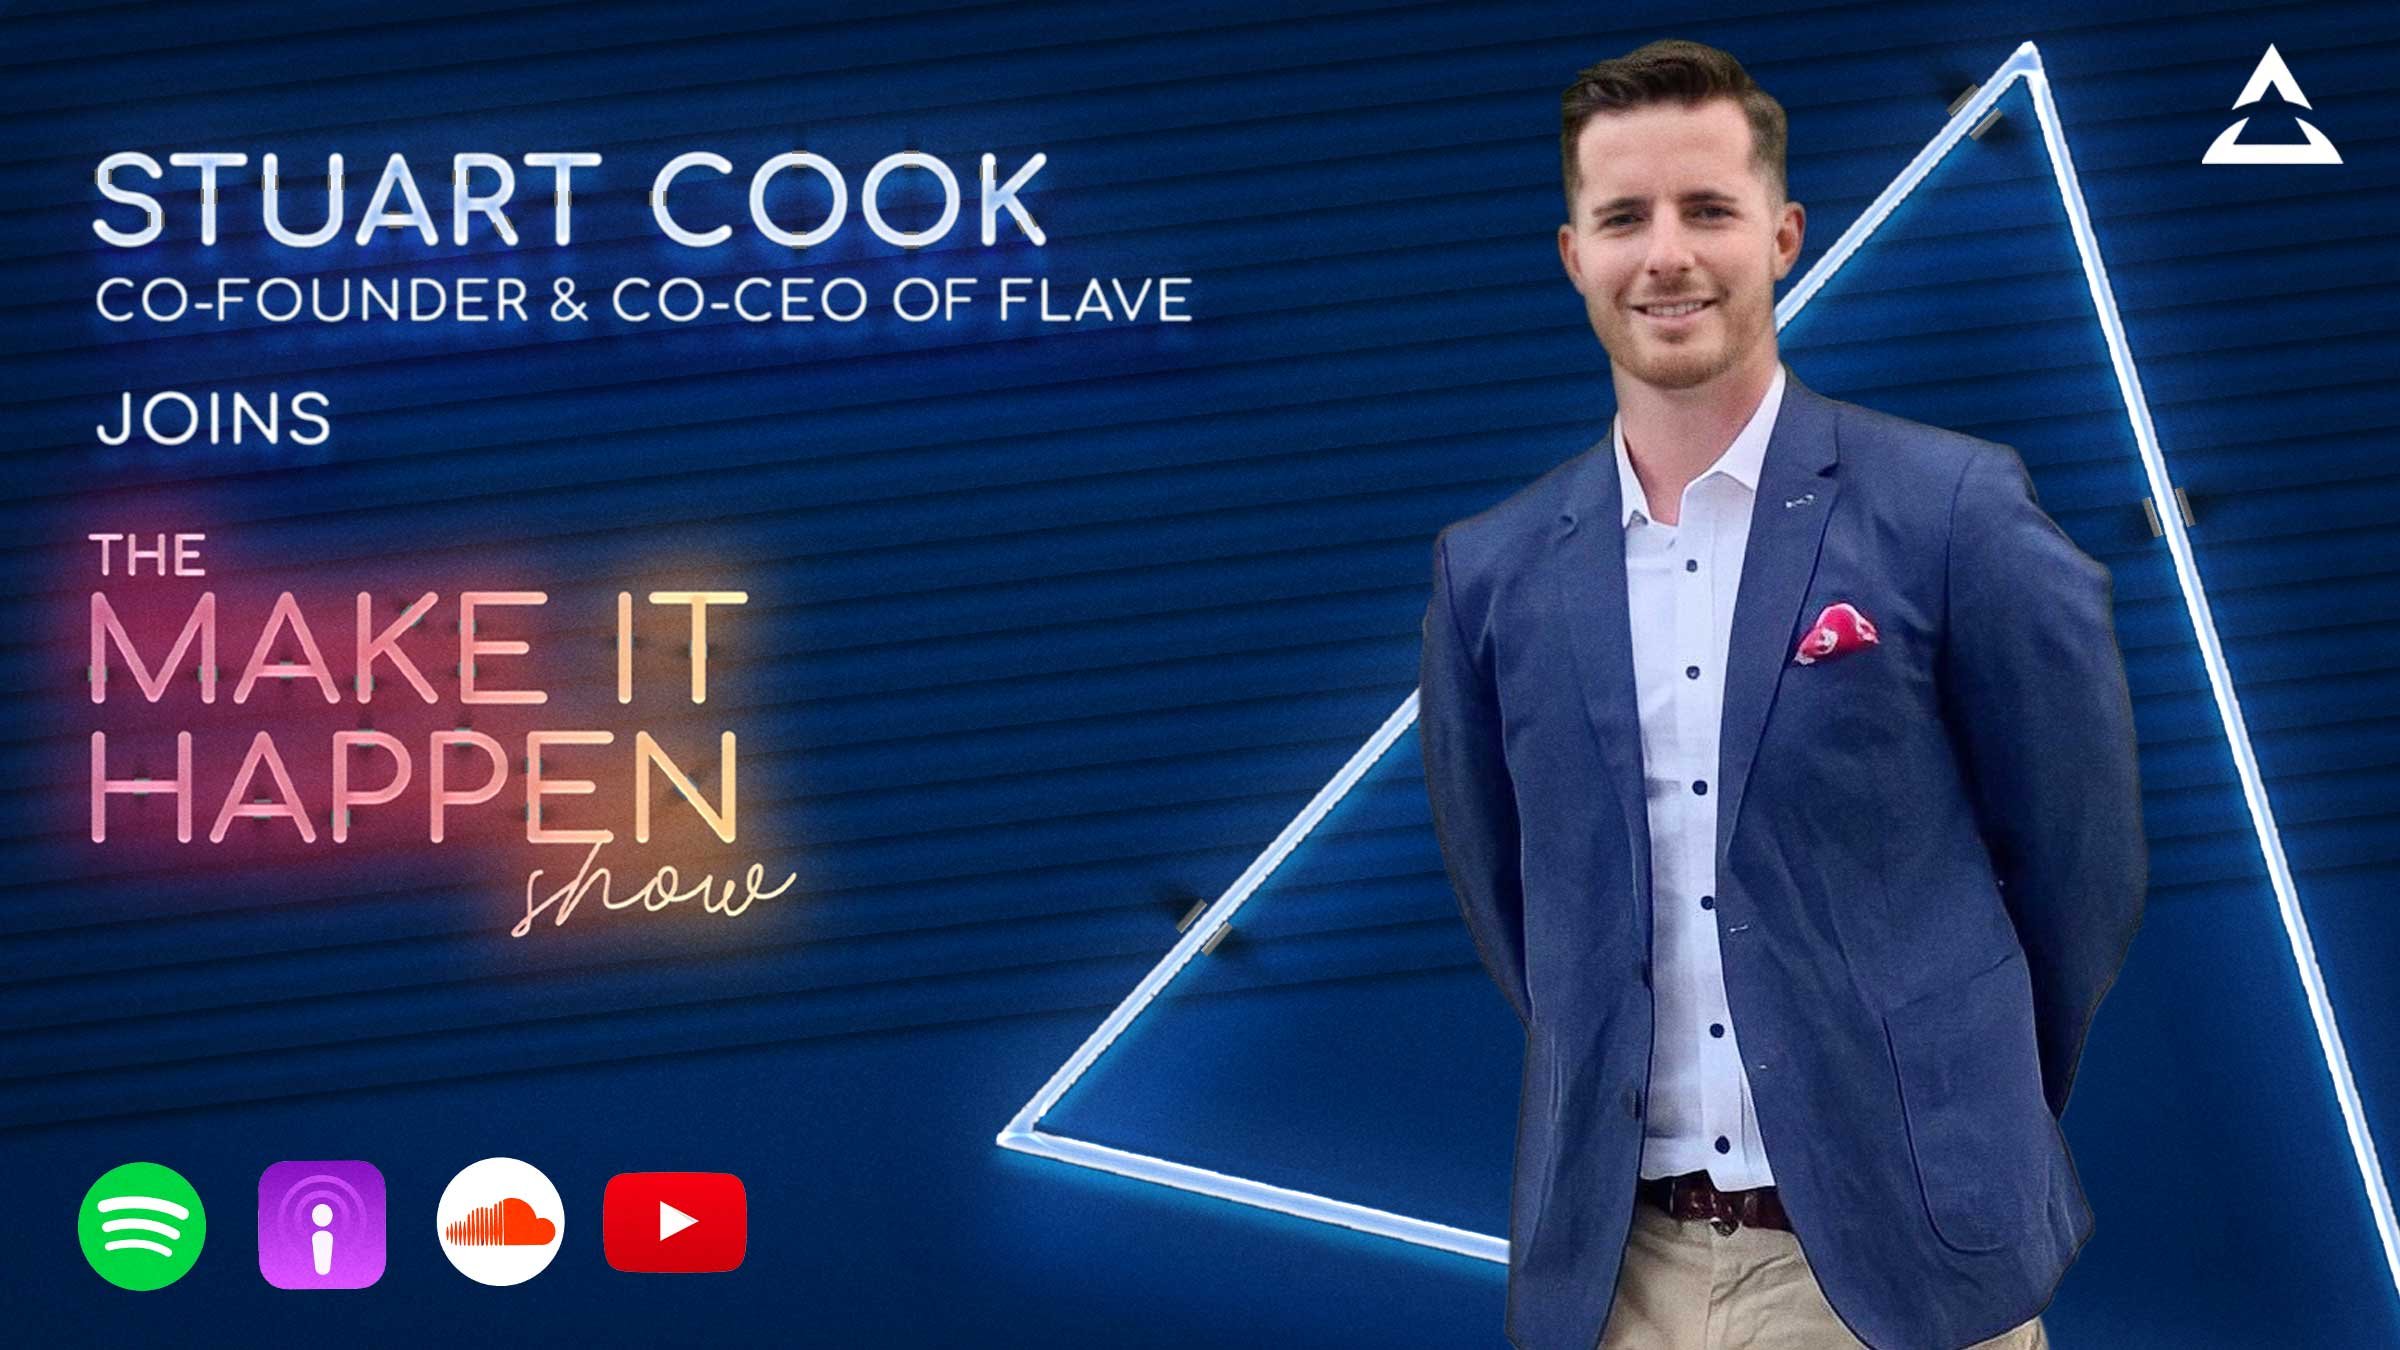 Stuart Cook, Co-Founder and Co-CEO of Flave joins The Make It Happen Show